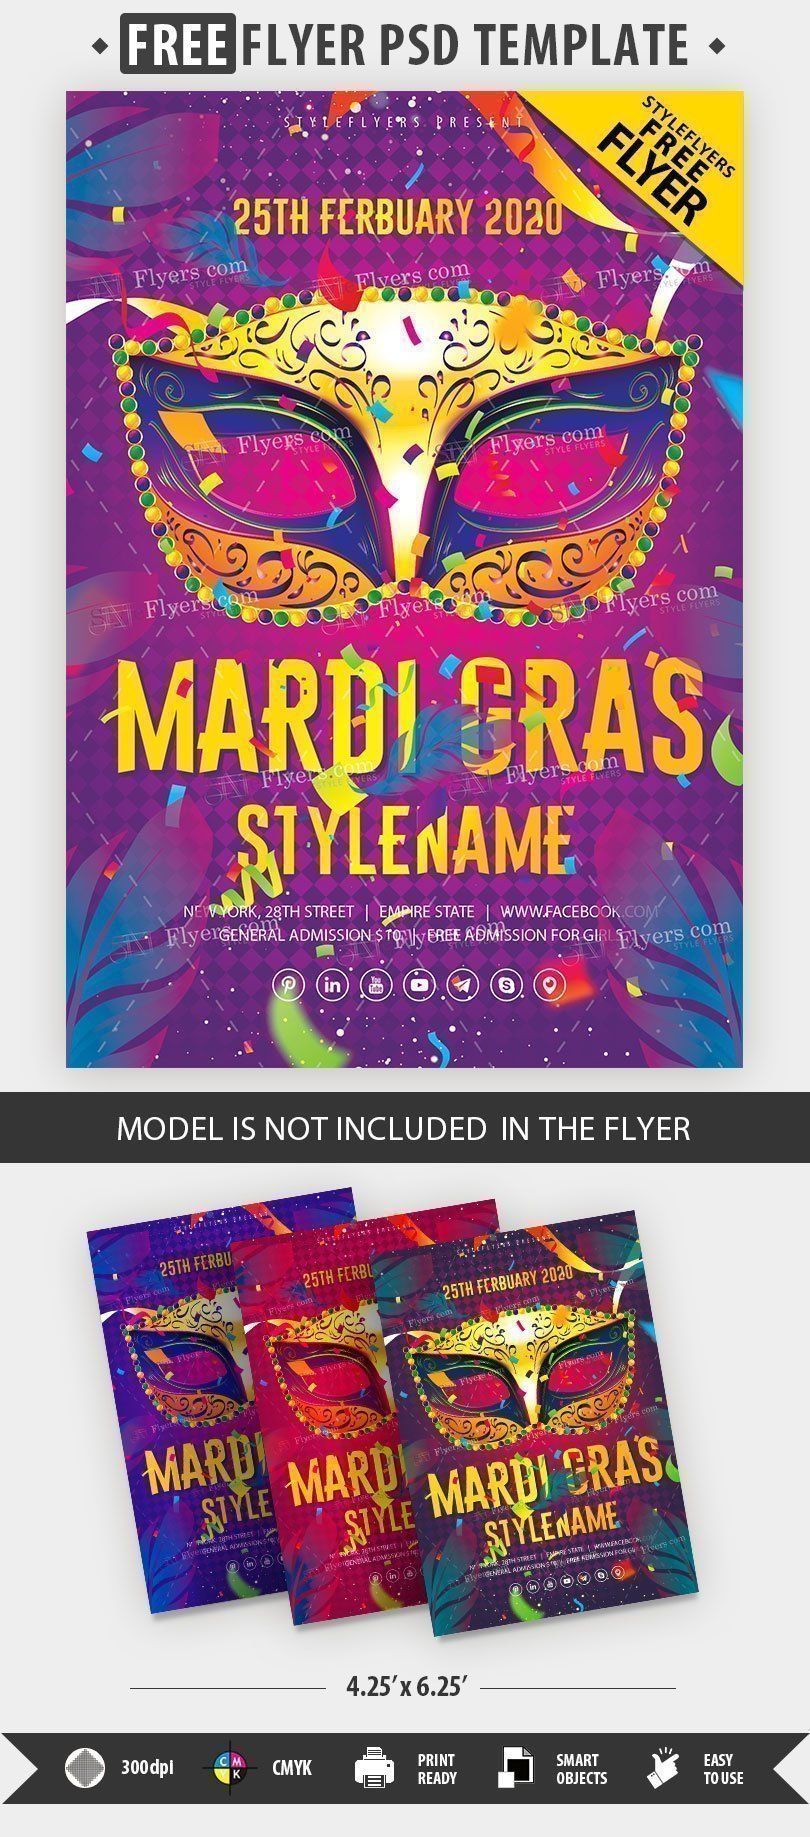 mardi-gras-free-psd-flyer-template-free-download-34470-styleflyers